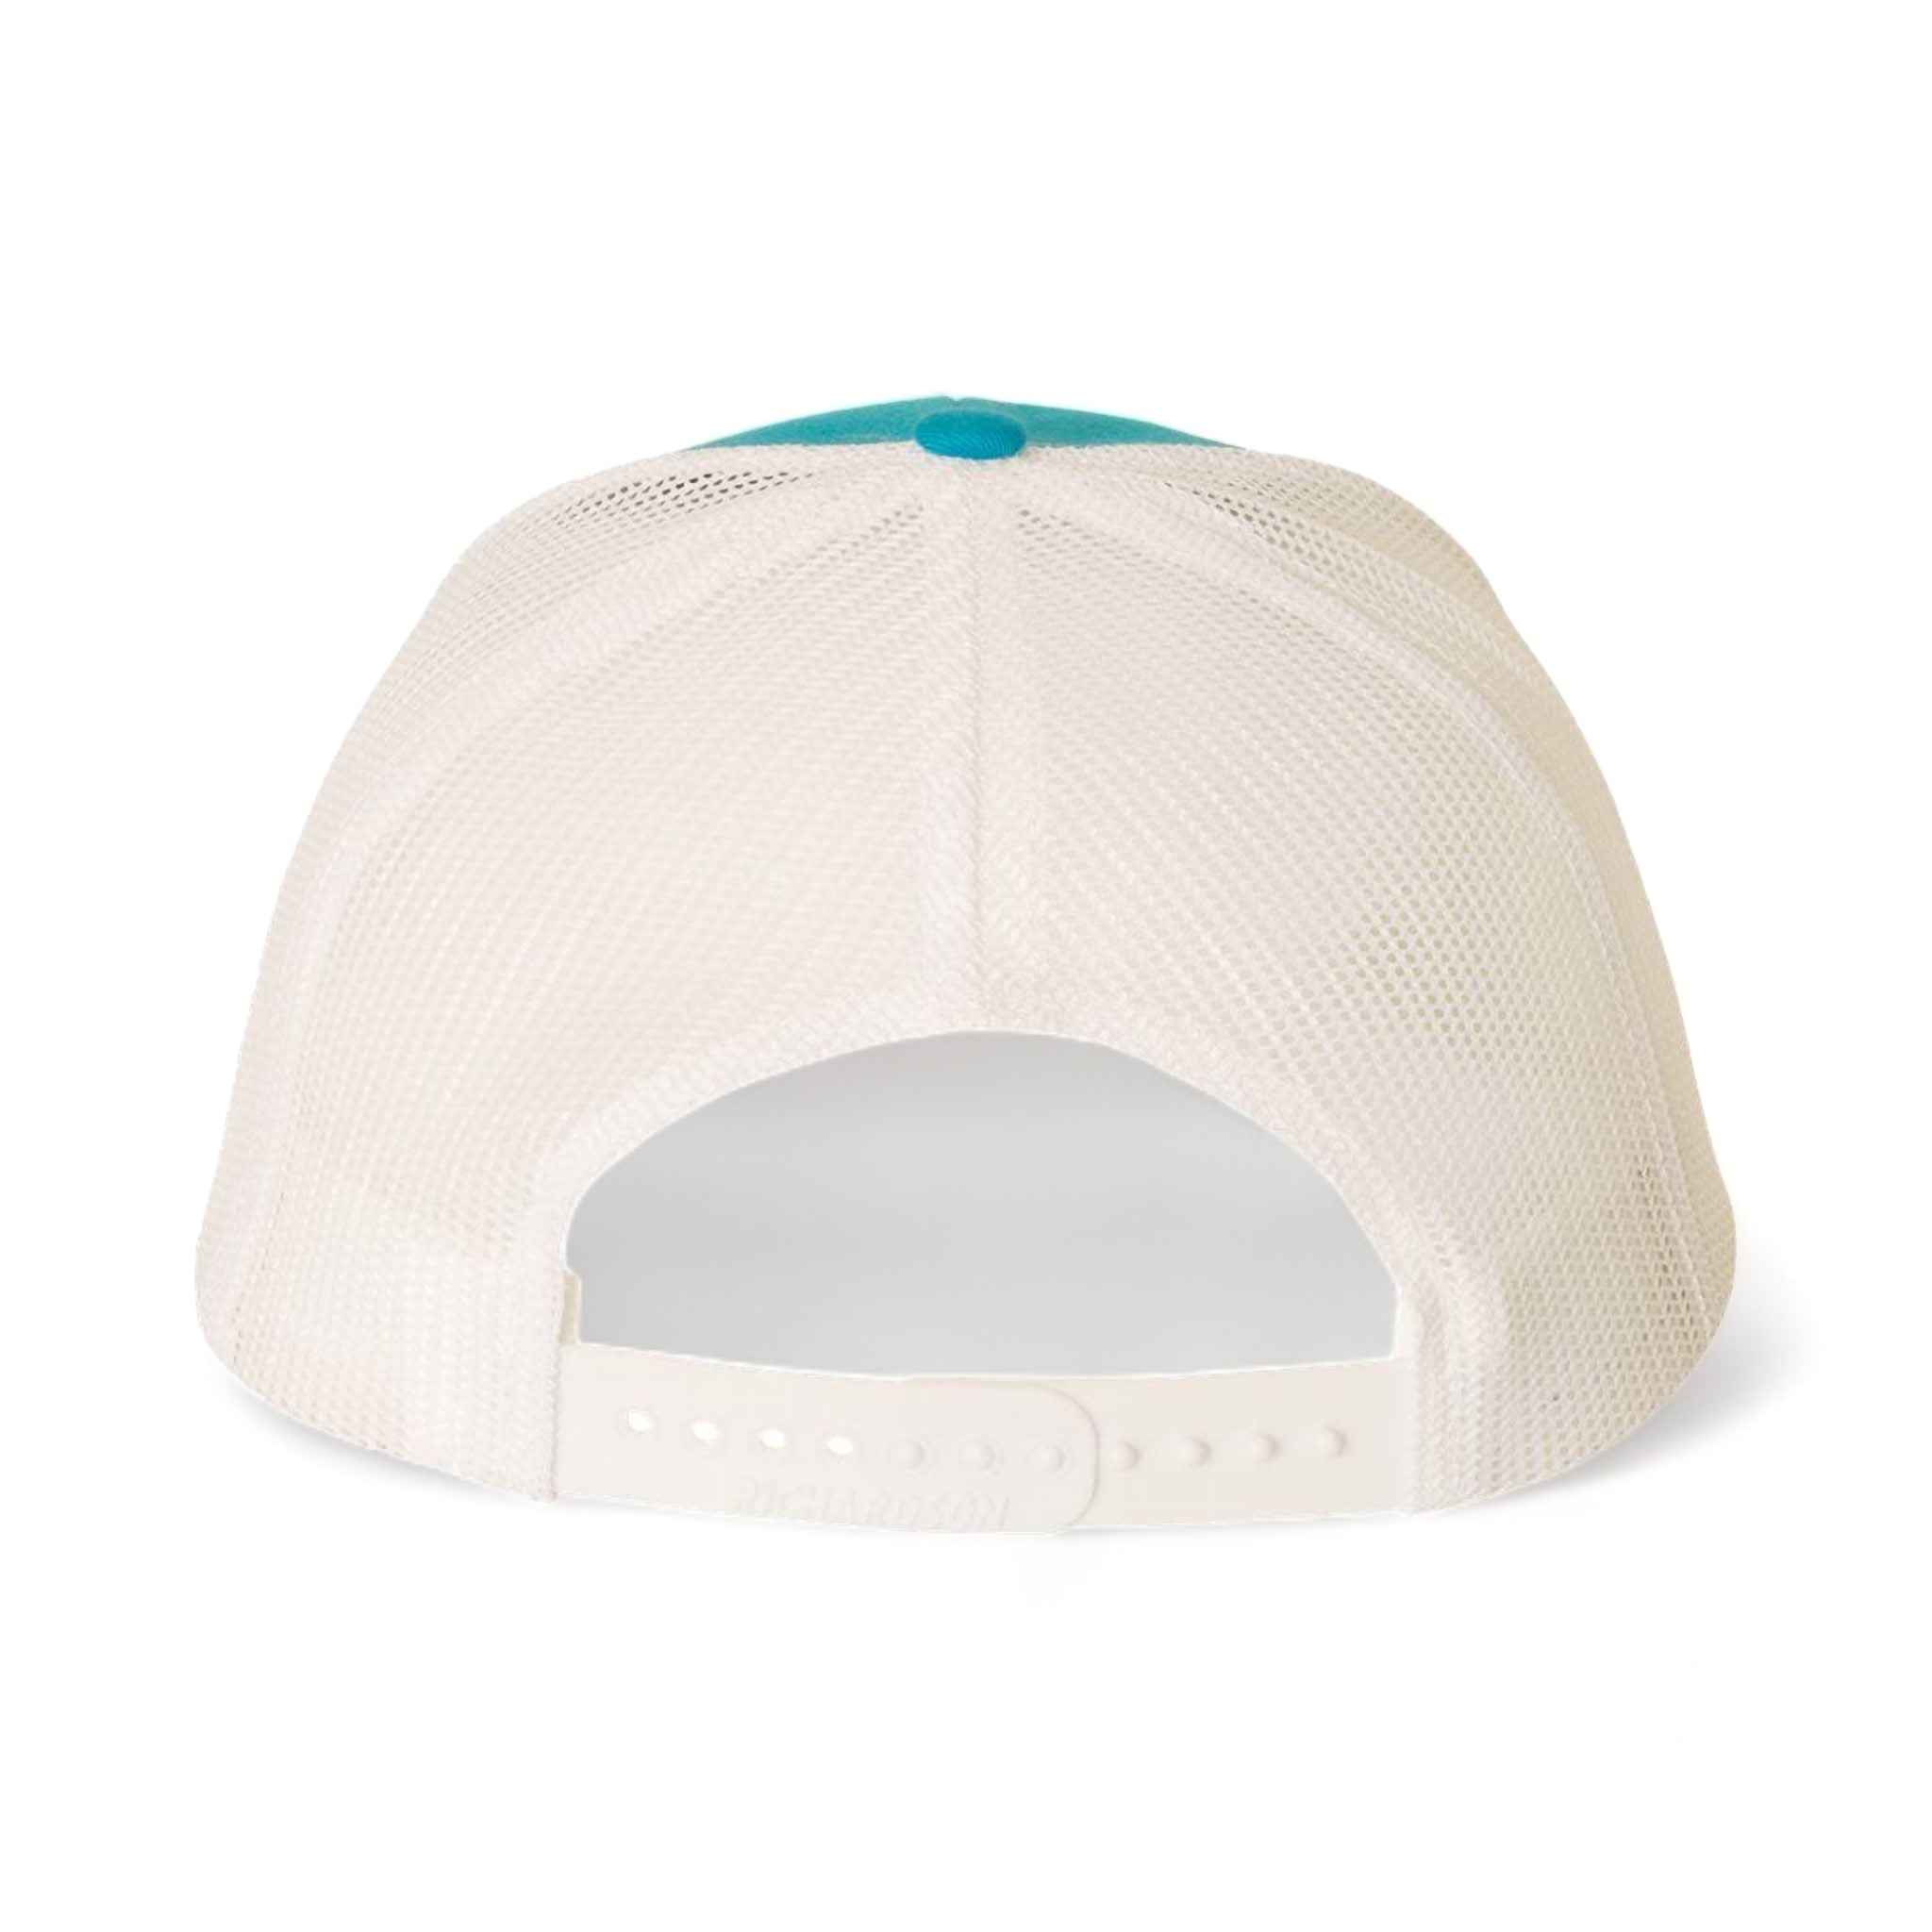 Back view of Richardson 112 custom hat in cyan and white